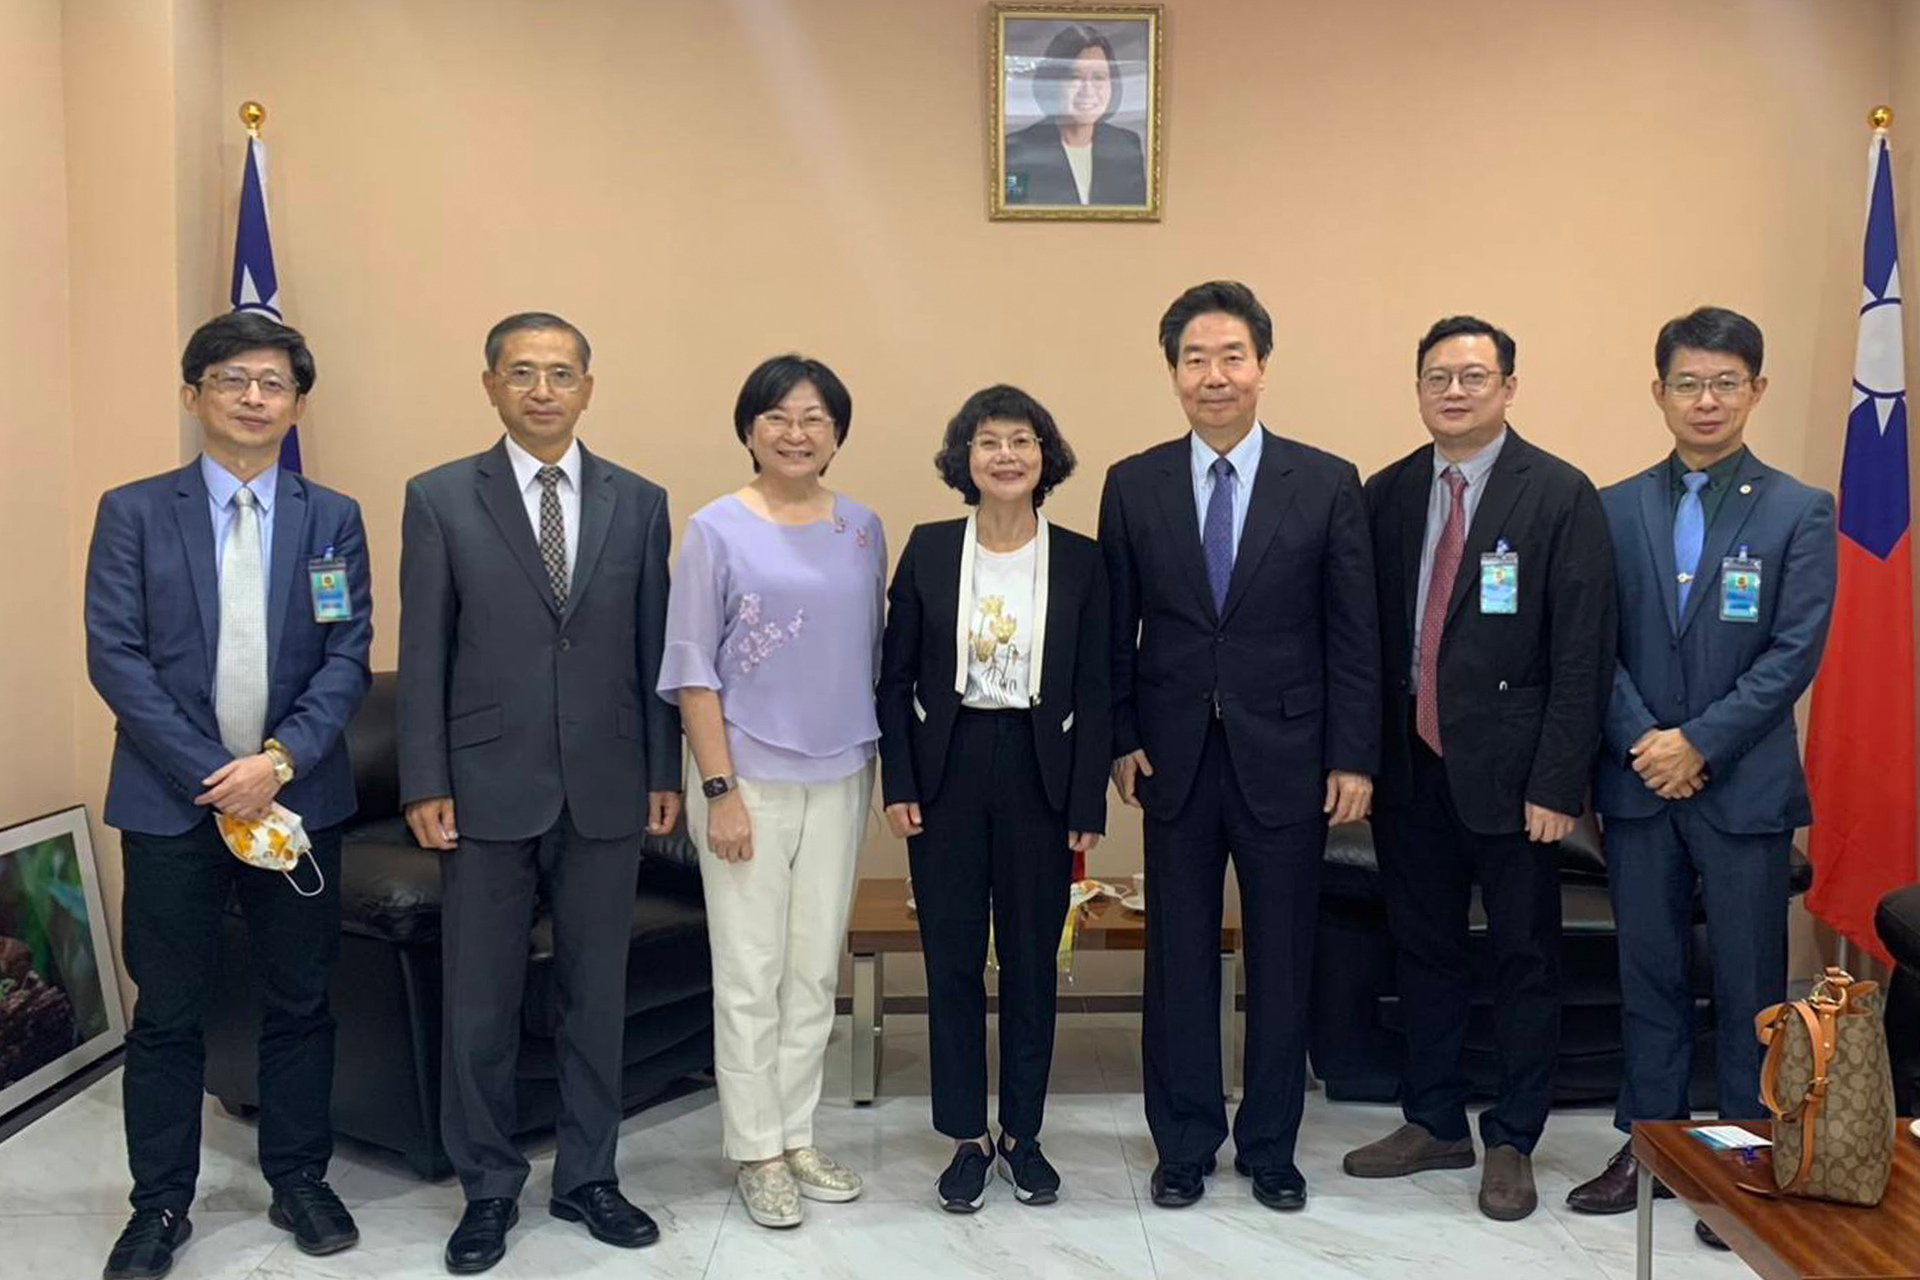 The president of NUK, Yueh-Tuan Chen (The fourth one from left) and the delegation was welcomed by the Representative of Taipei Economic and Cultural Office in Thailand, Shuo-Han Chuang (The third one from right).